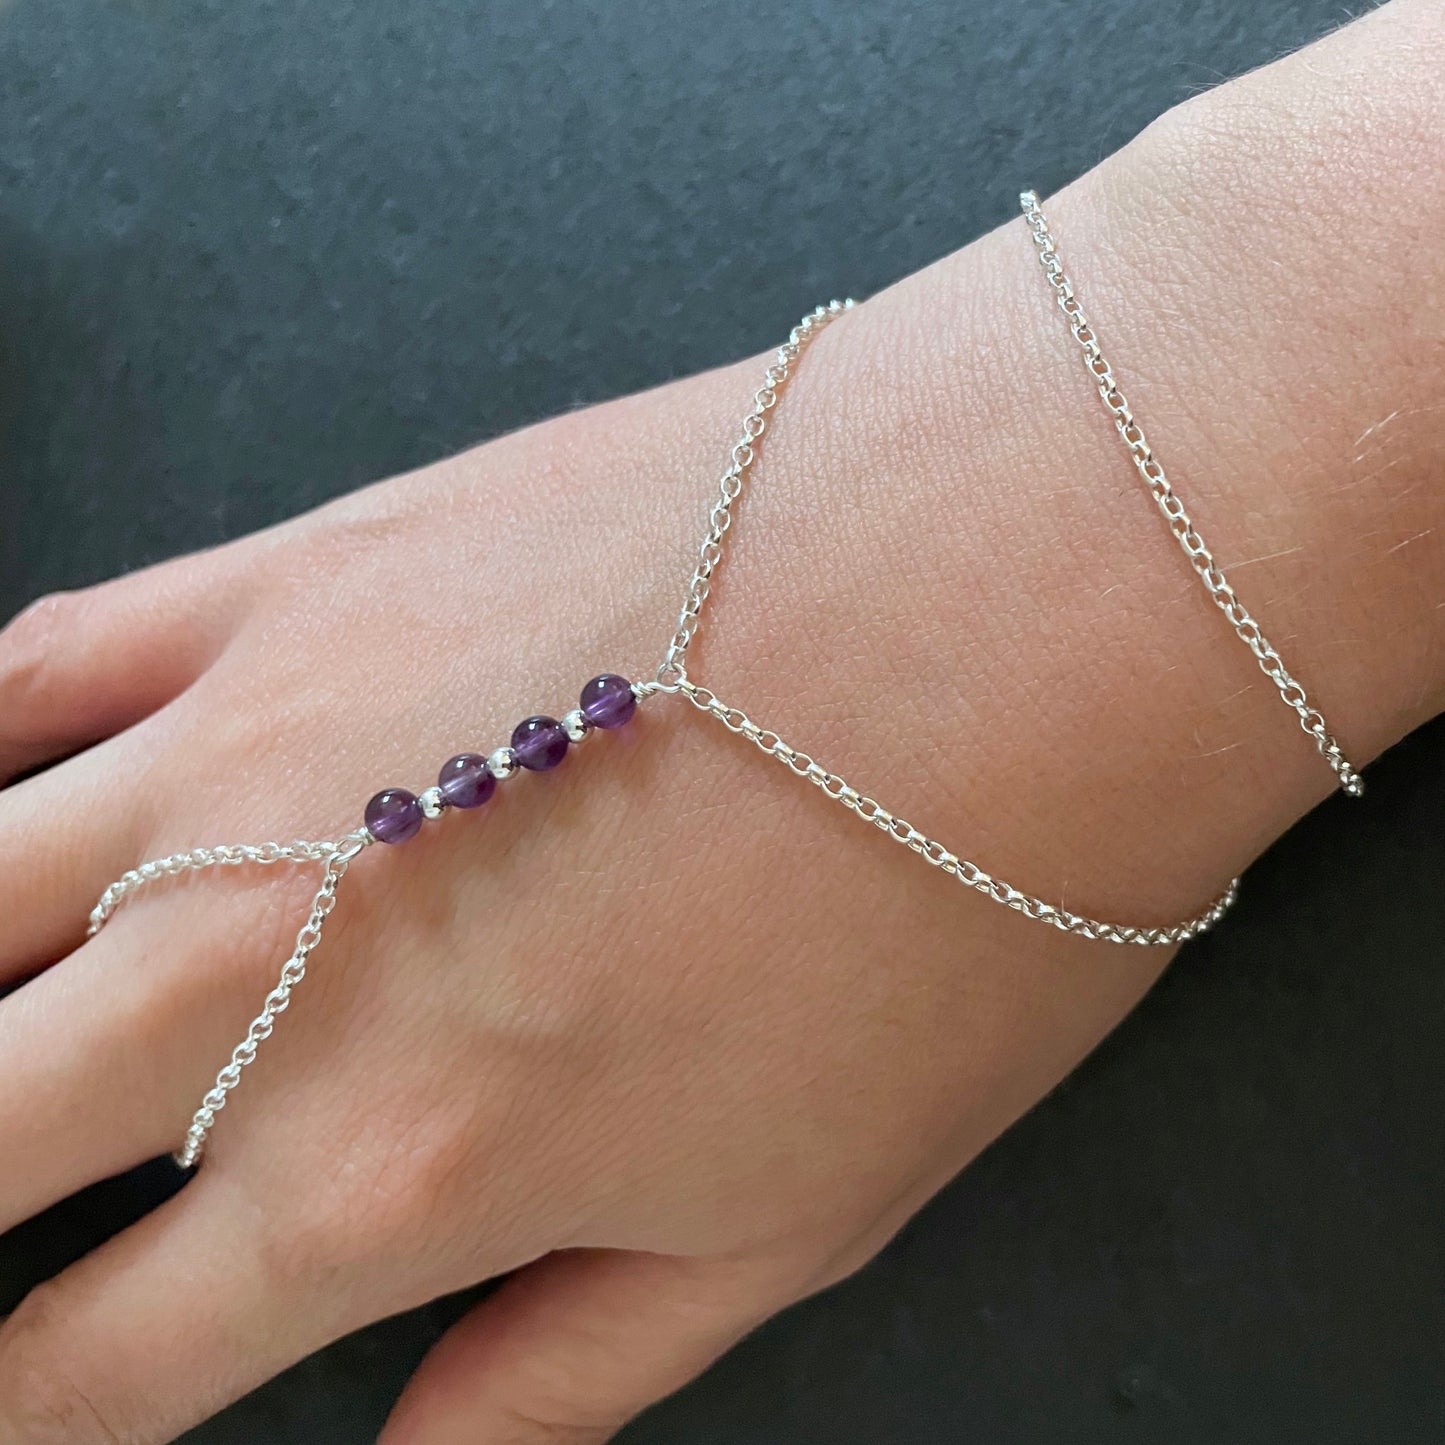 Sterling silver hand chain featuring Amethyst Beads on ahand